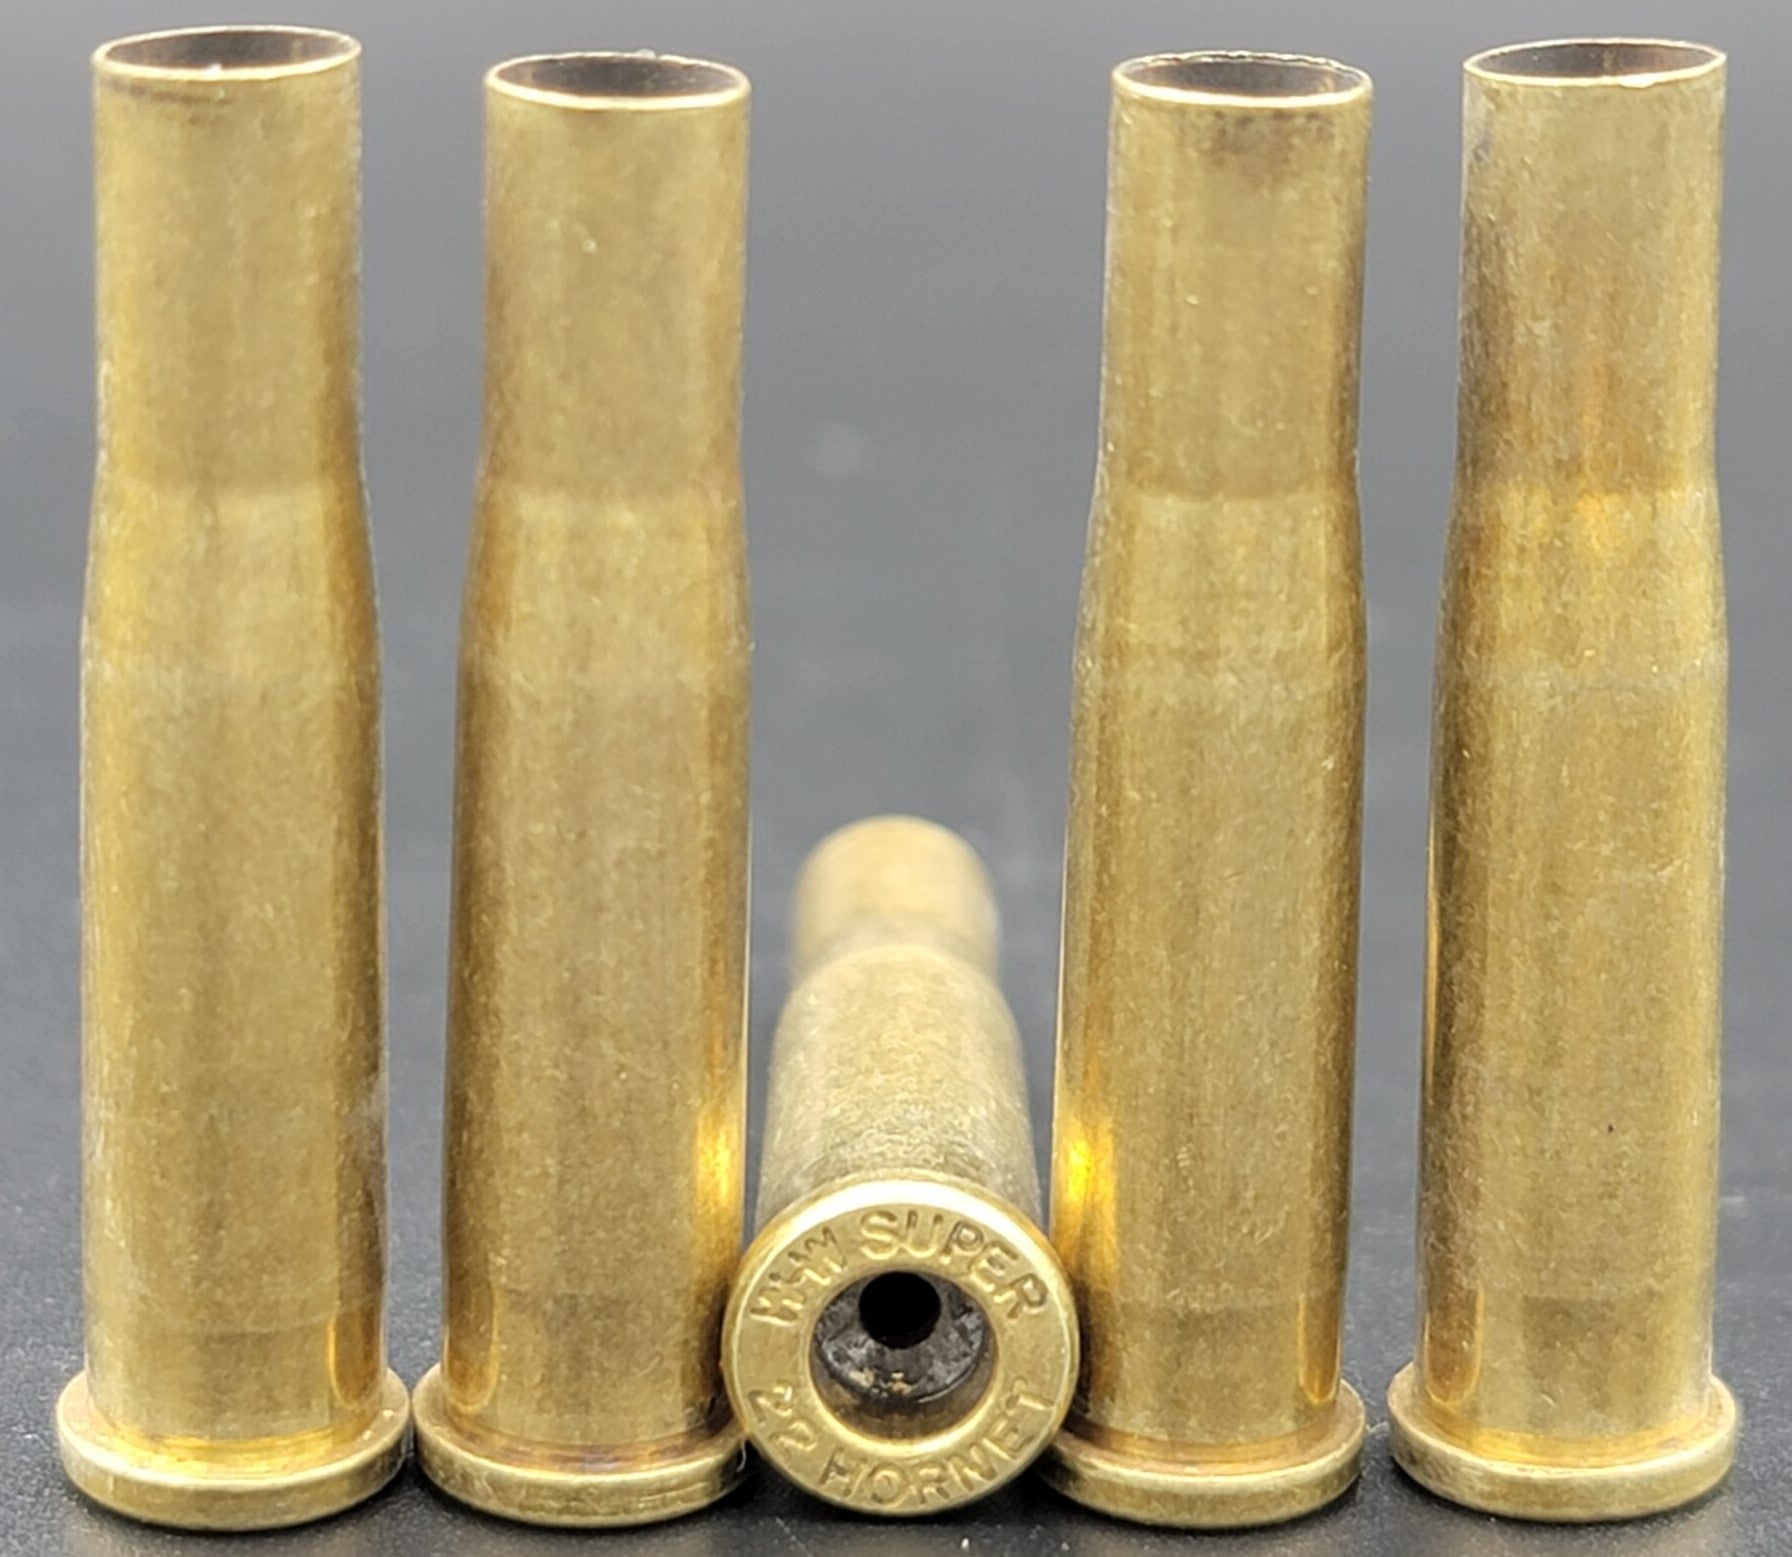 22 Hornet once fired rifle brass. Hand sorted from reputable indoor/military ranges for reloading. Reliable spent casings for precision shooting.